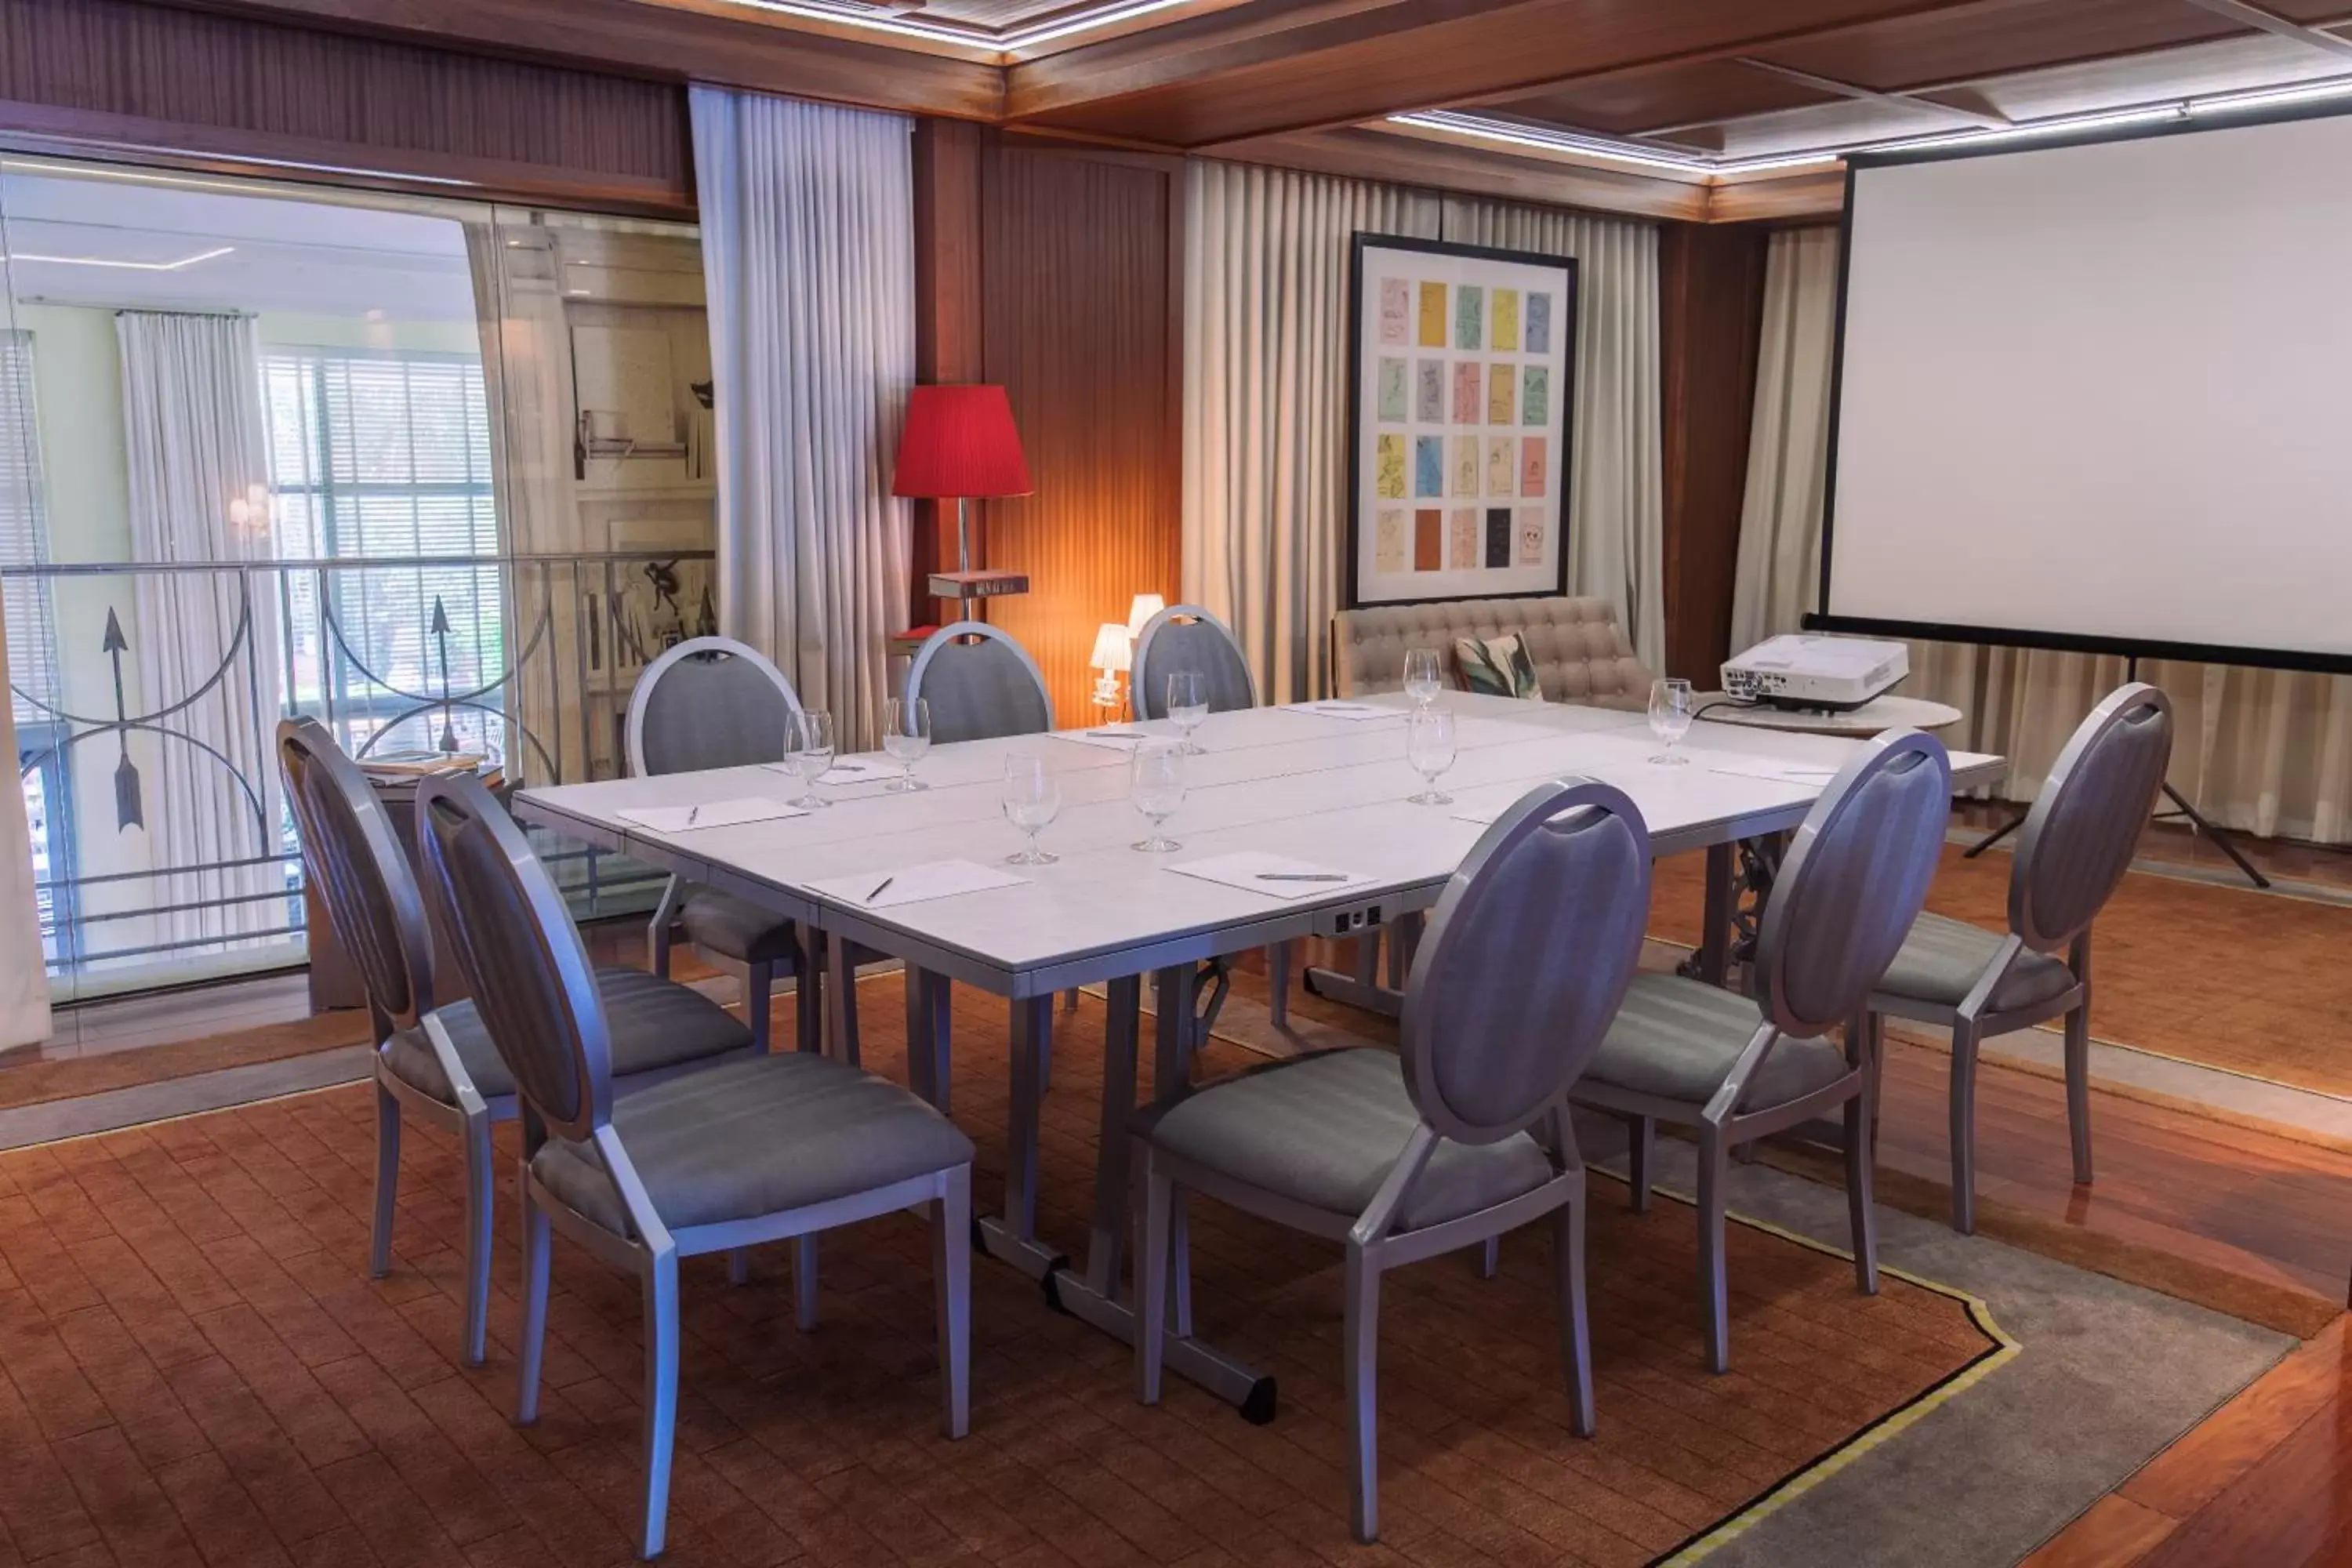 Meeting/conference room in SLS South Beach